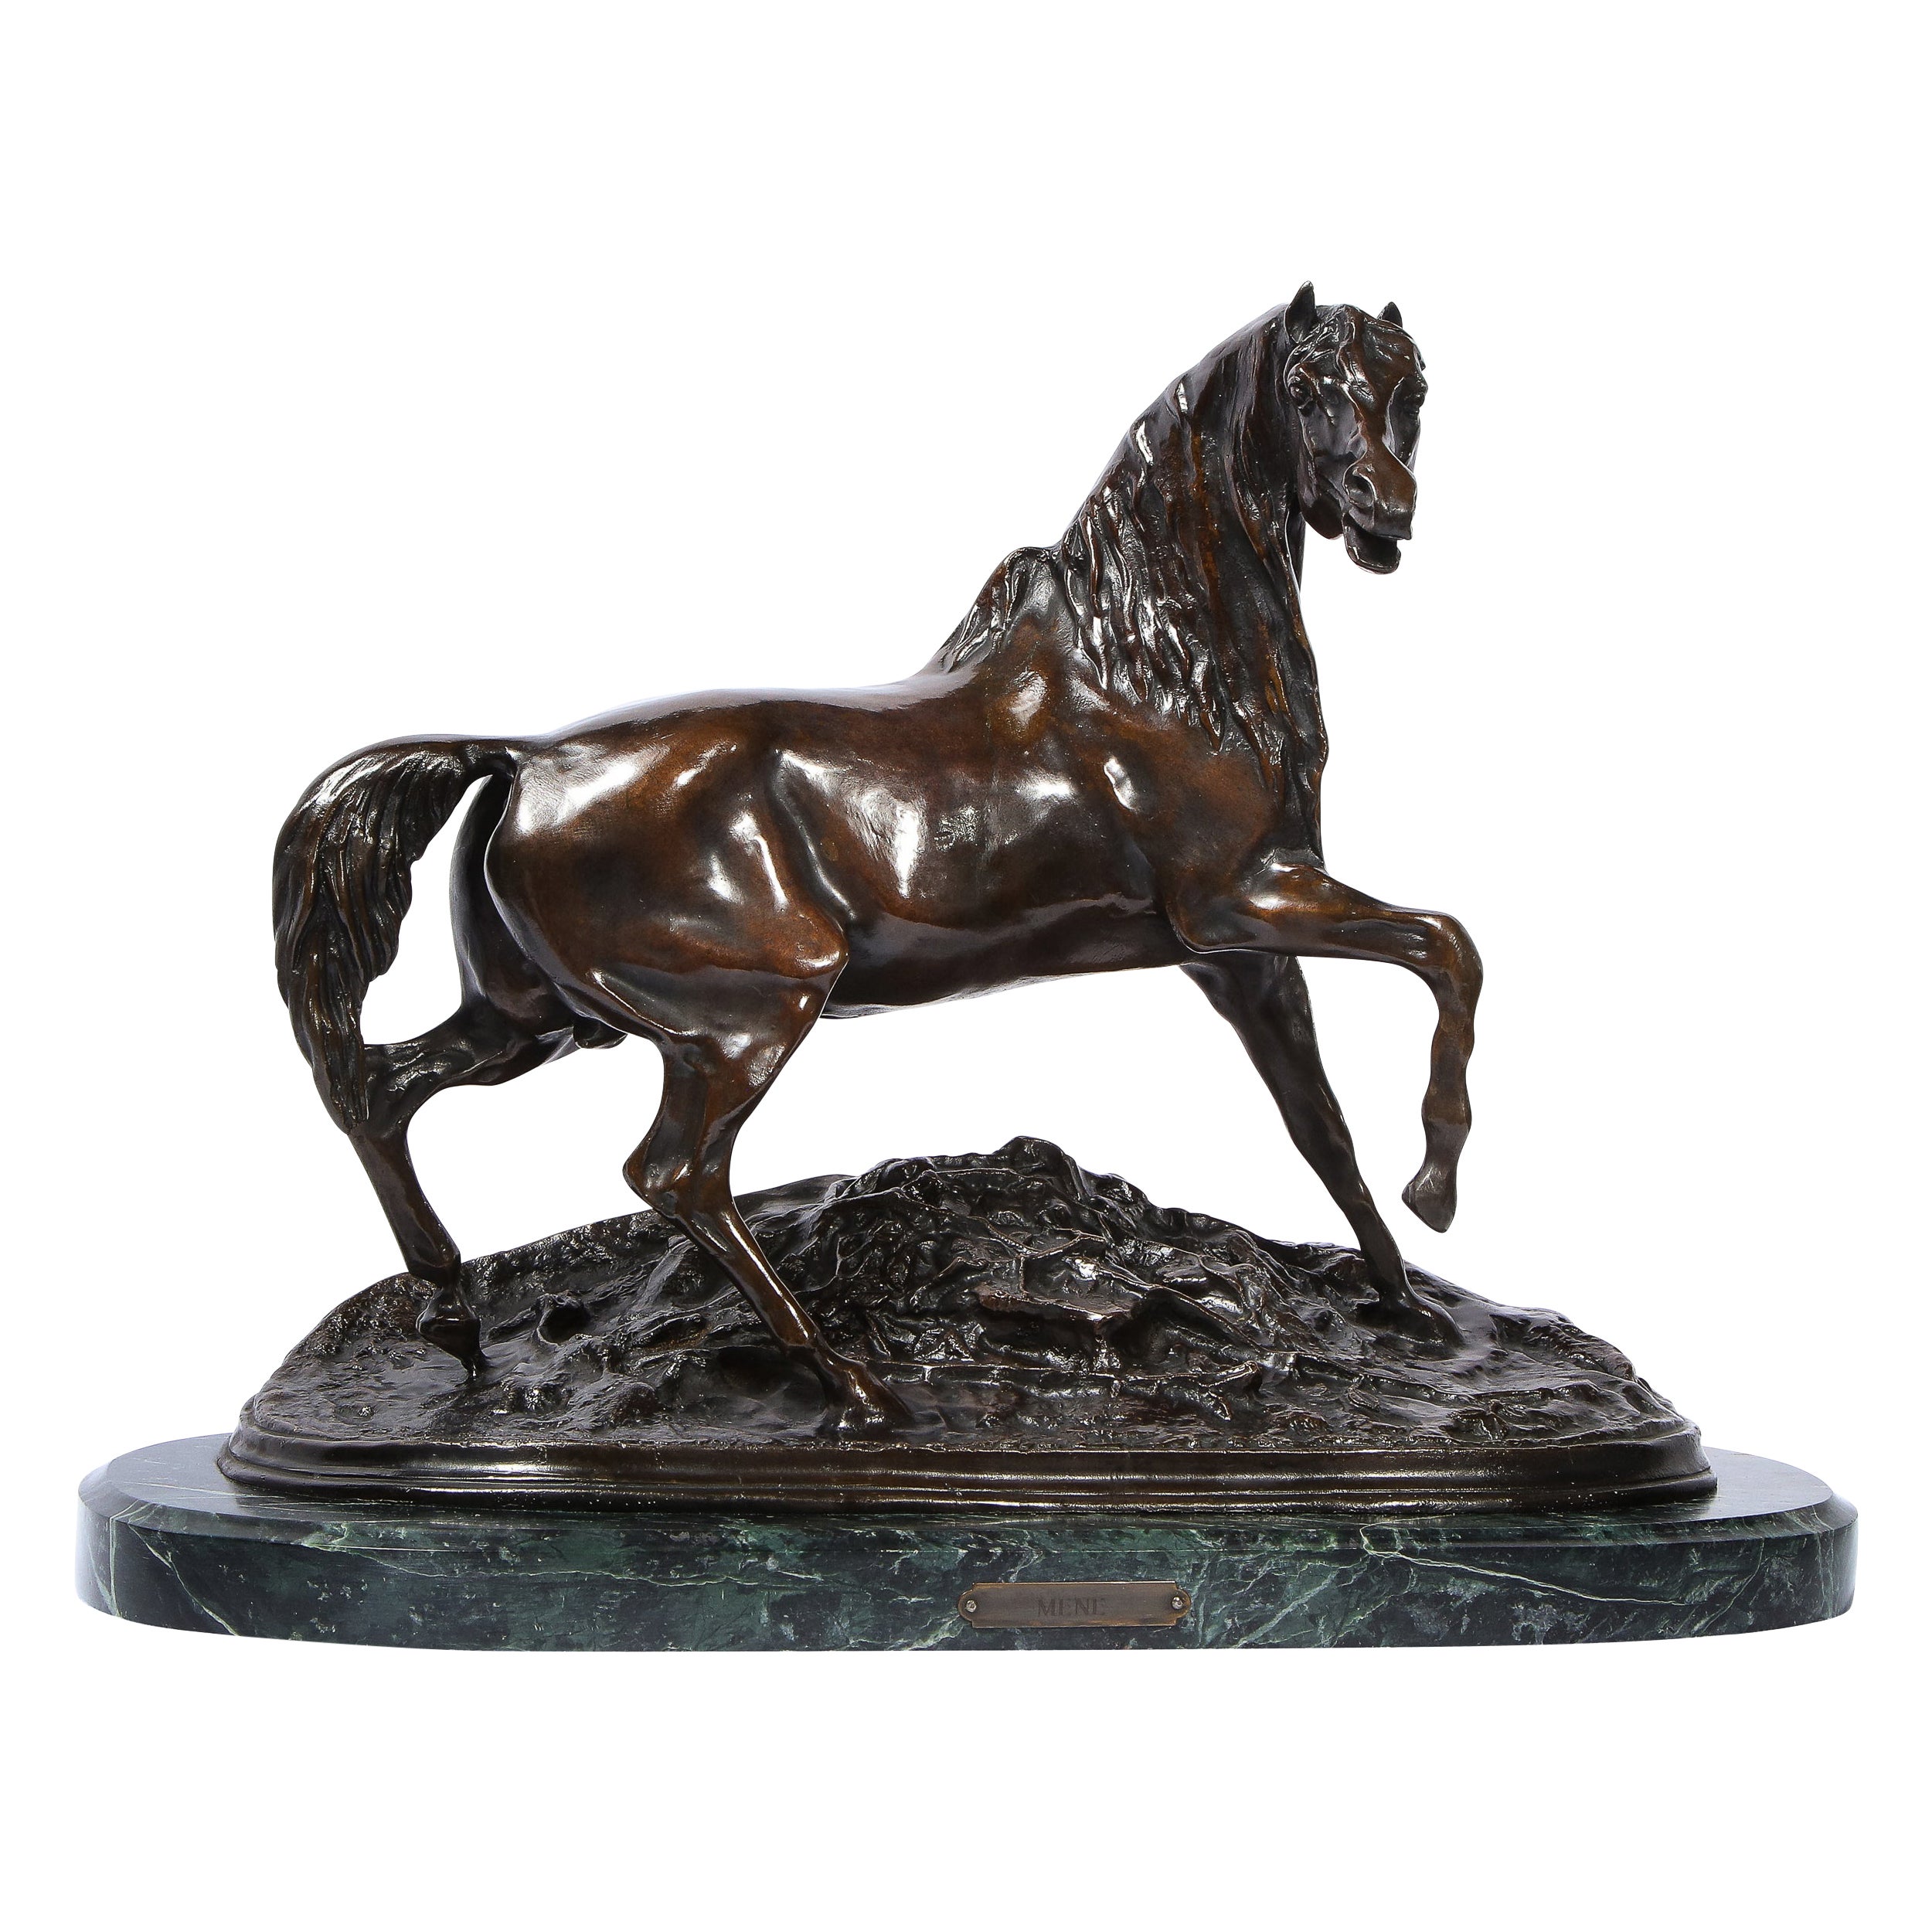 Which dynasty bronze sculptures are most famous?